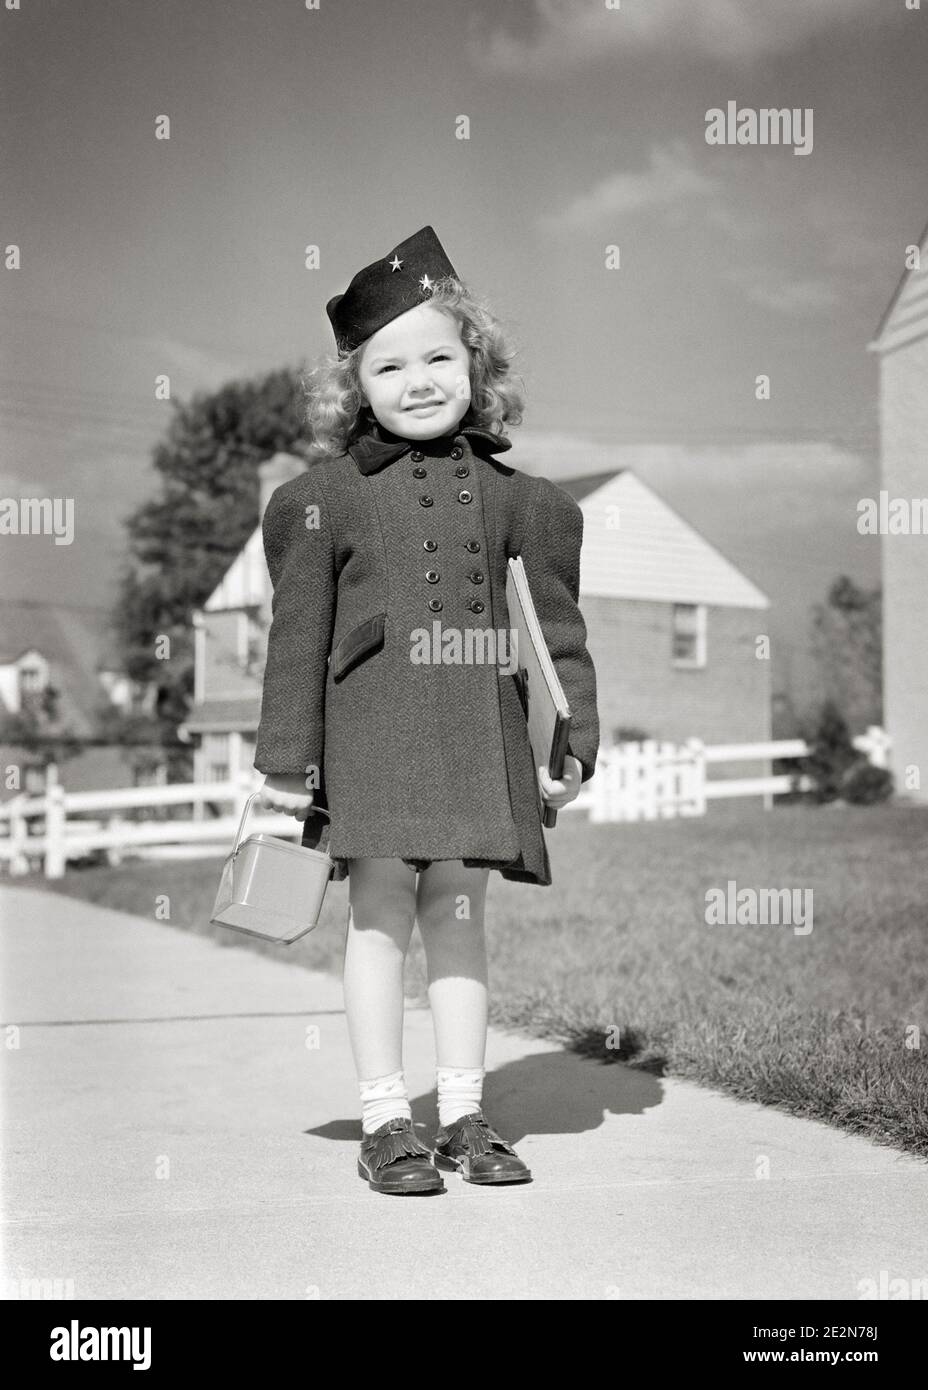 1940s SMILING LITTLE GIRL READY FOR SCHOOL STANDING ON SIDEWALK WEARING BLACK HAT DOUBLE BREASTED COAT HOLDING LUNCH BOX & BOOK - s9722 HAR001 HARS COPY SPACE FULL-LENGTH B&W EYE CONTACT HAPPINESS CHEERFUL STYLES EXTERIOR POSING SMILES JOYFUL STYLISH PLEASANT AGREEABLE BREASTED CHARMING FASHIONS LOVABLE PLEASING ADORABLE APPEALING BLACK AND WHITE CAUCASIAN ETHNICITY HAR001 OLD FASHIONED Stock Photo